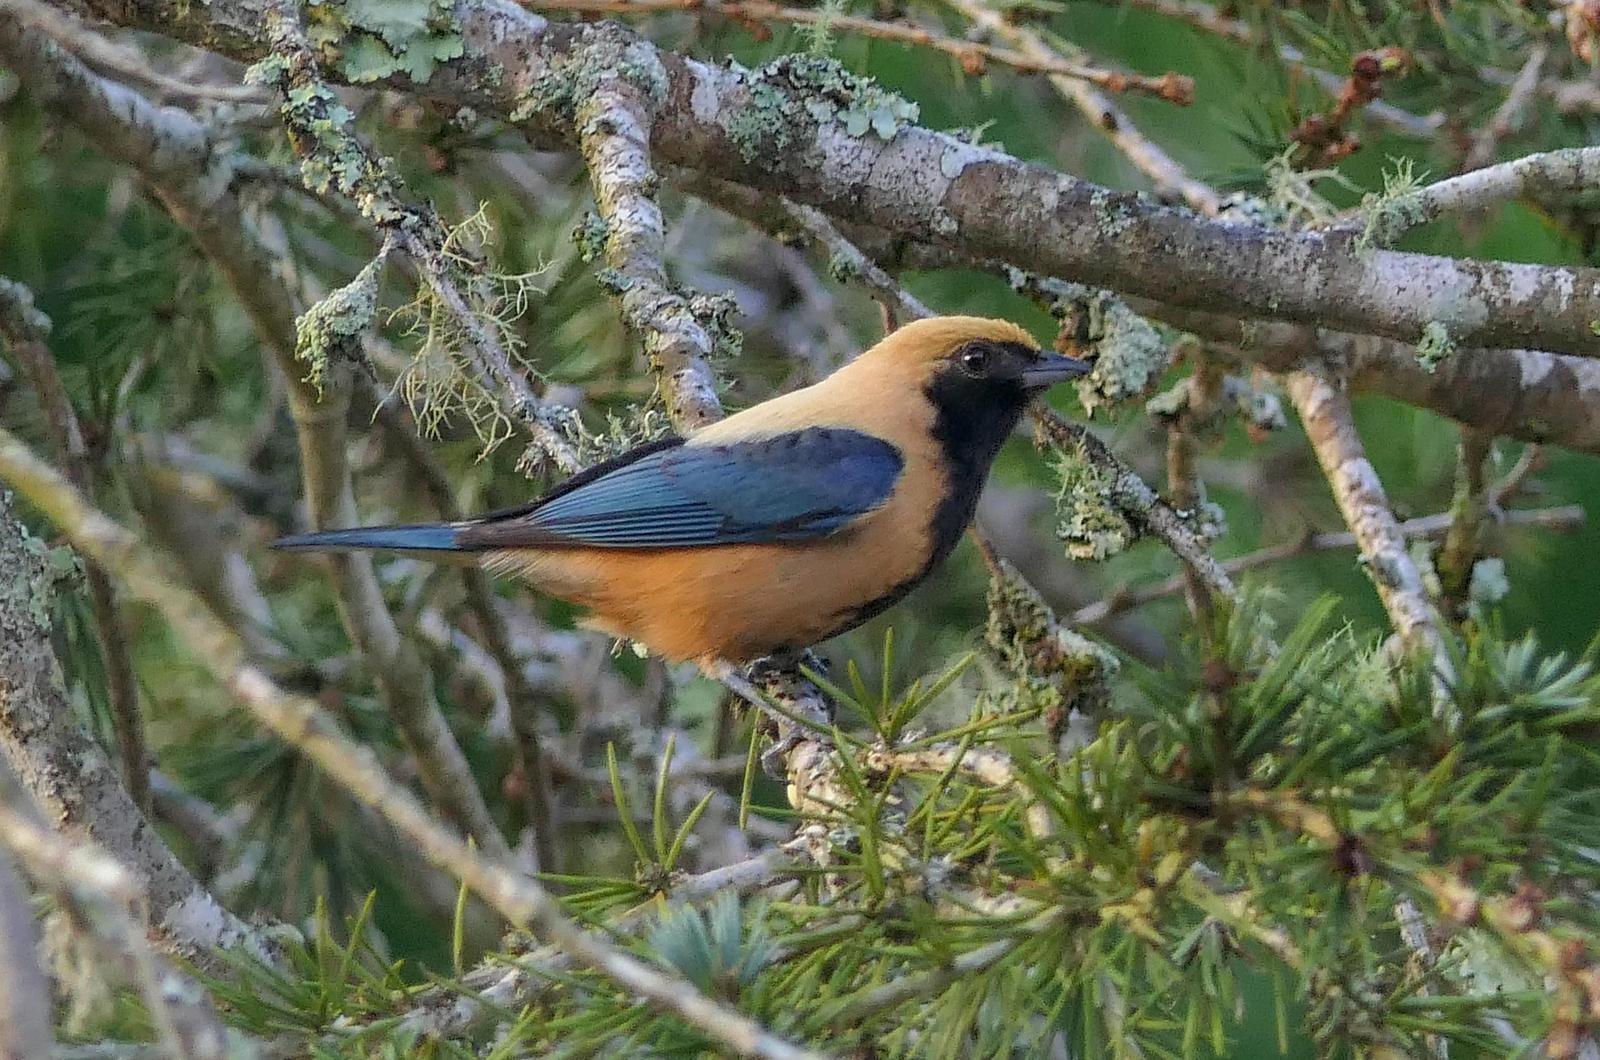 Burnished-buff Tanager Photo by Randy Siebert